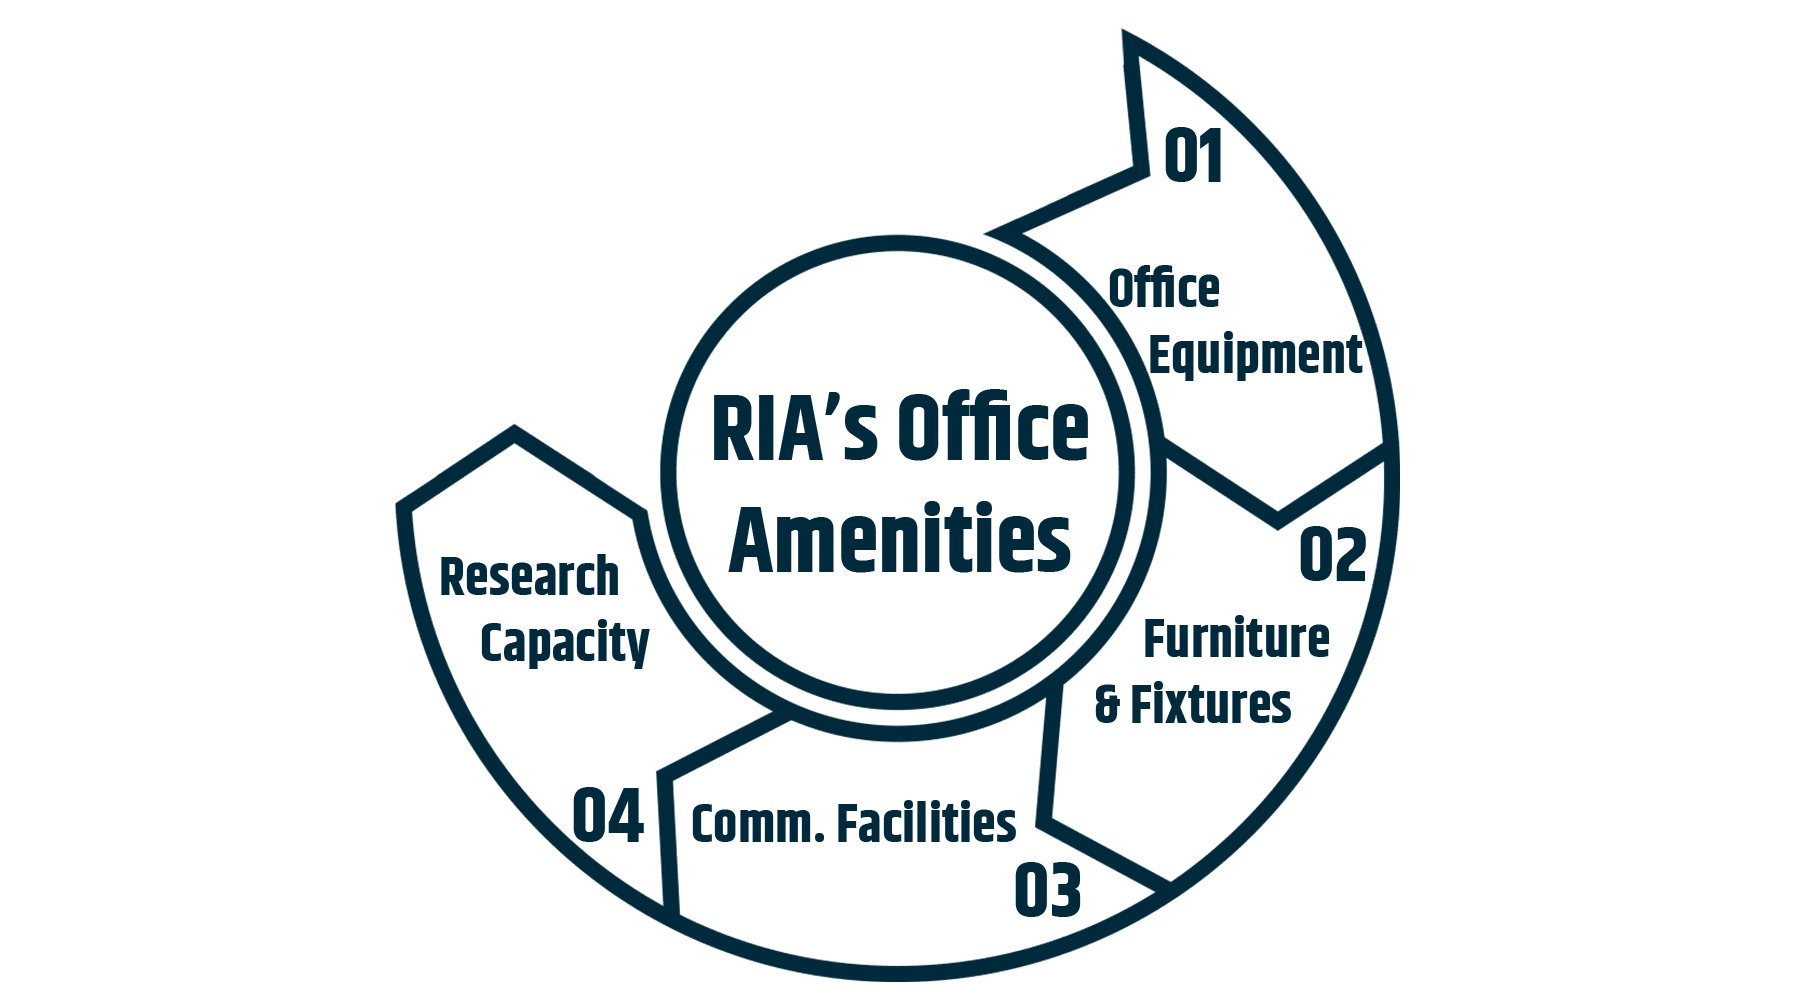 RIA License Office amenities